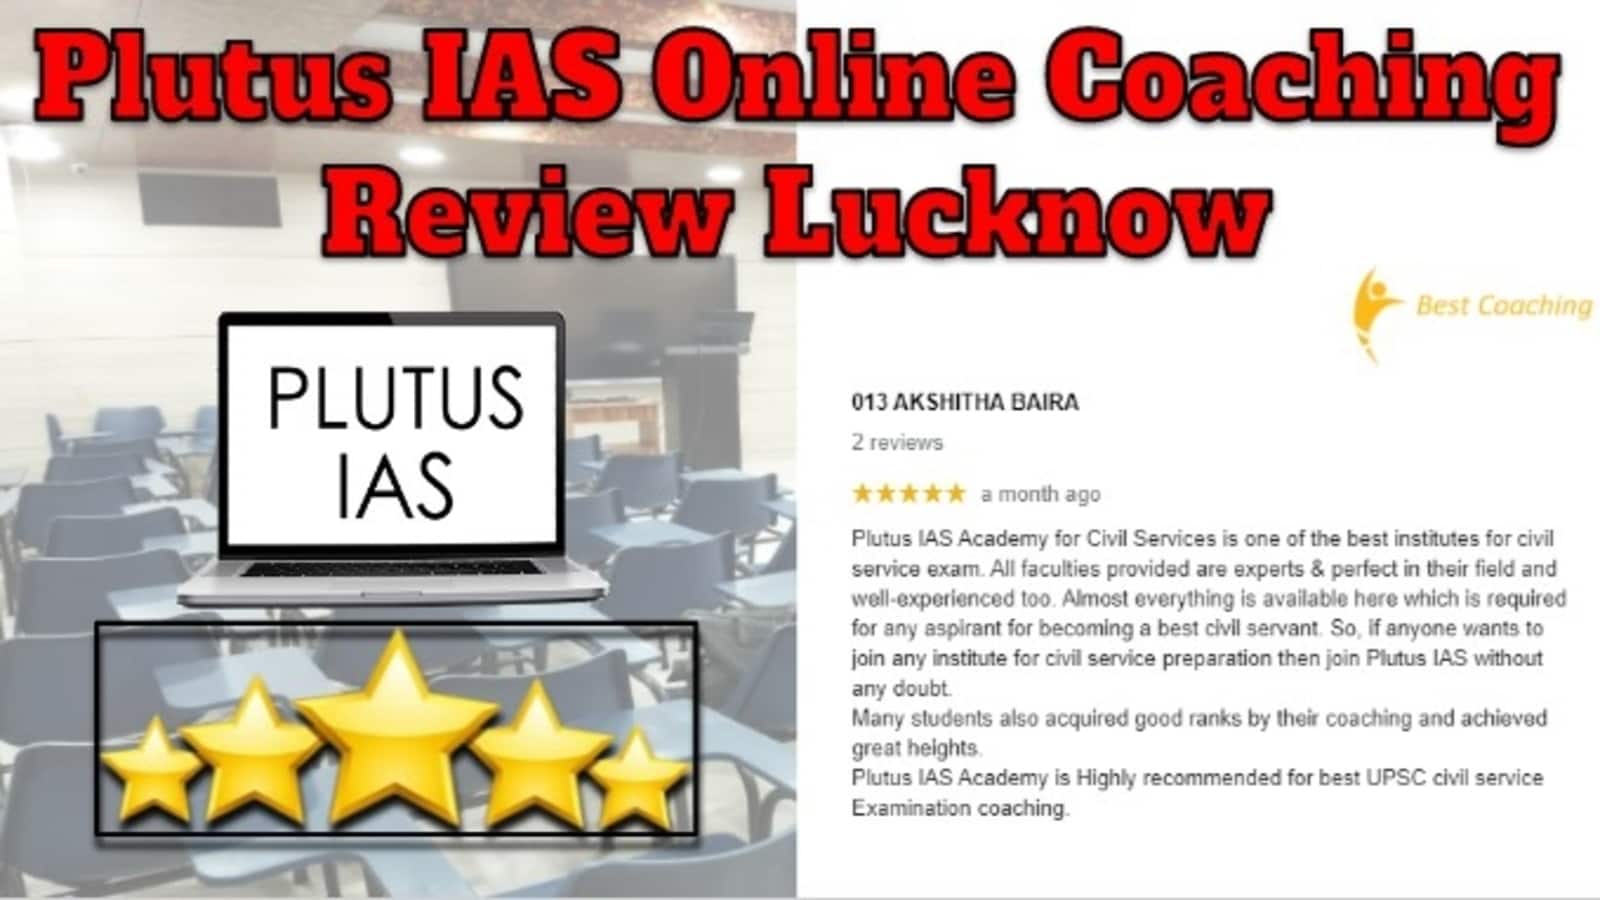 Plutus IAS Online Coaching Review Lucknow